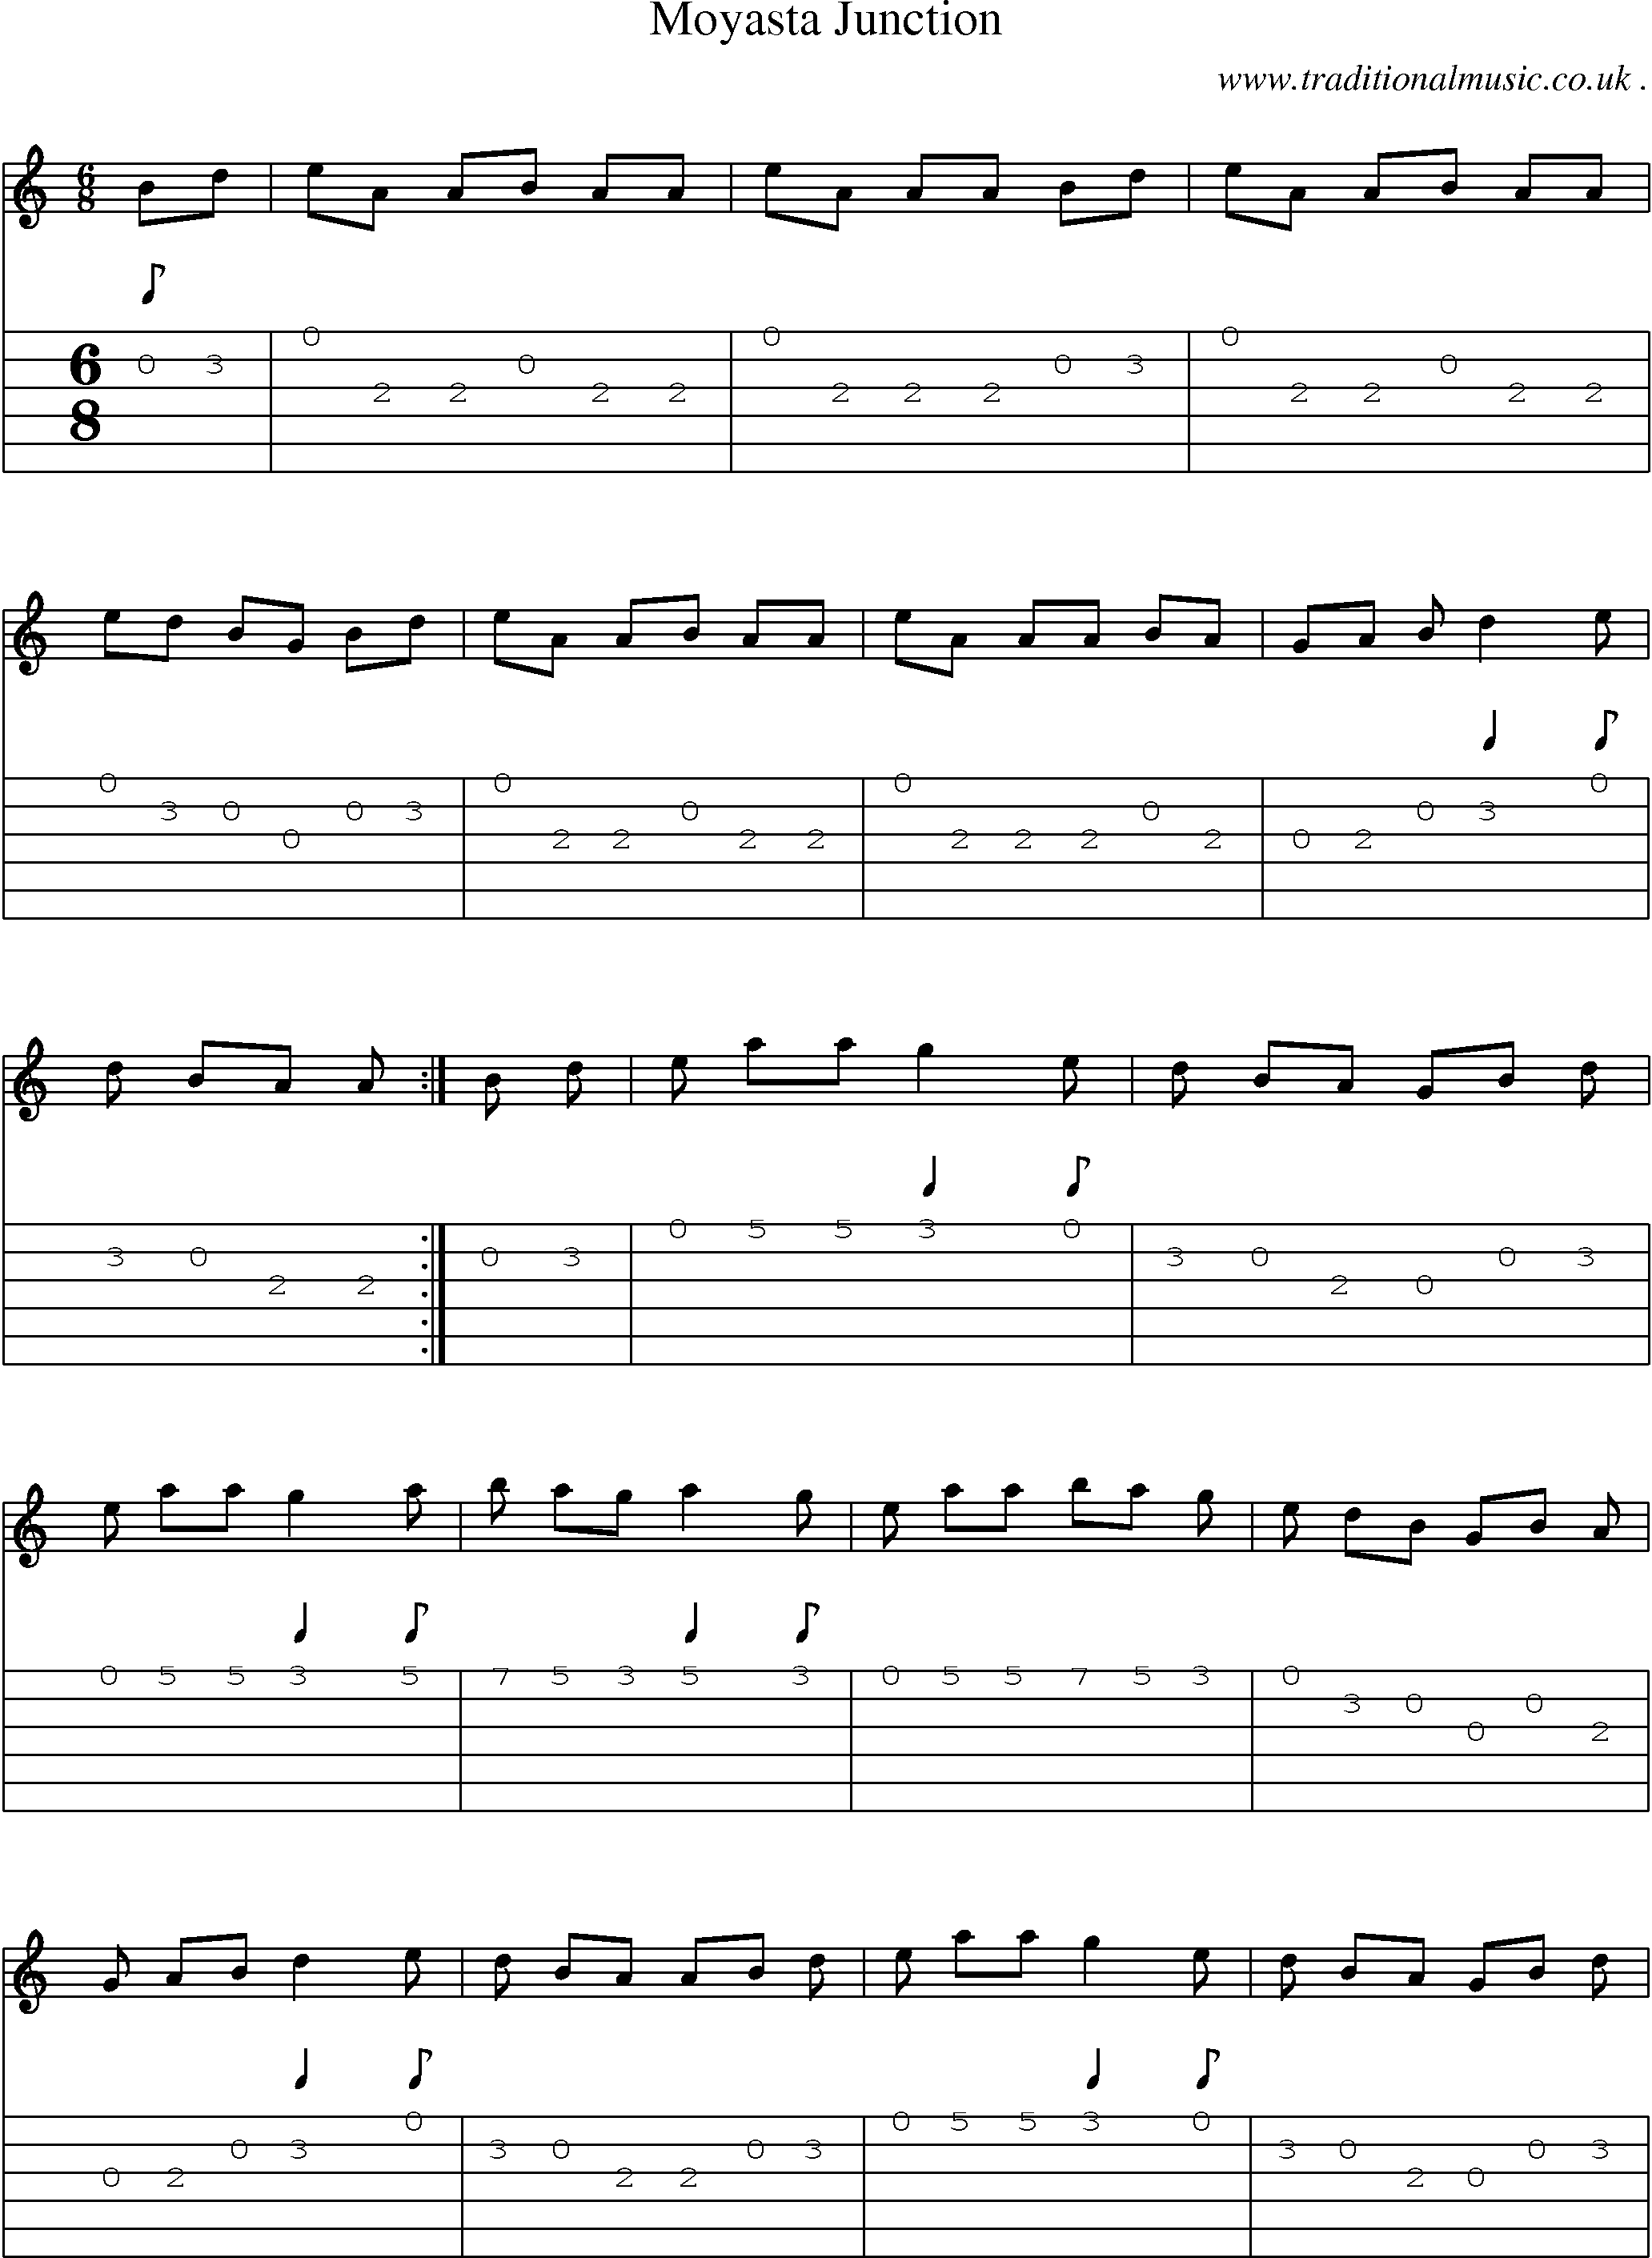 Sheet-Music and Guitar Tabs for Moyasta Junction